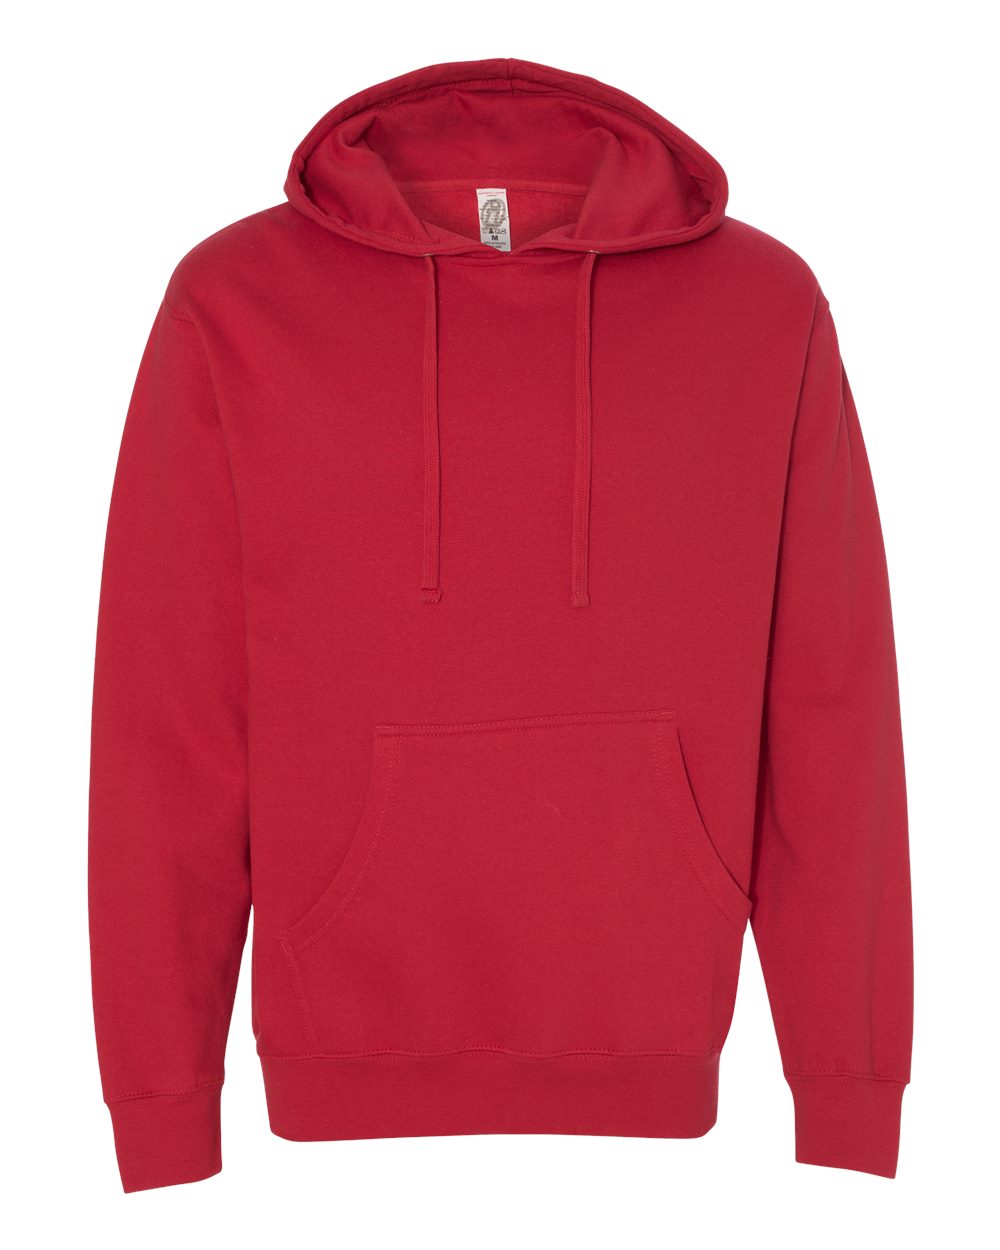 Independent Trading Co. Midweight Hooded Sweatshirt SS4500 #color_Red